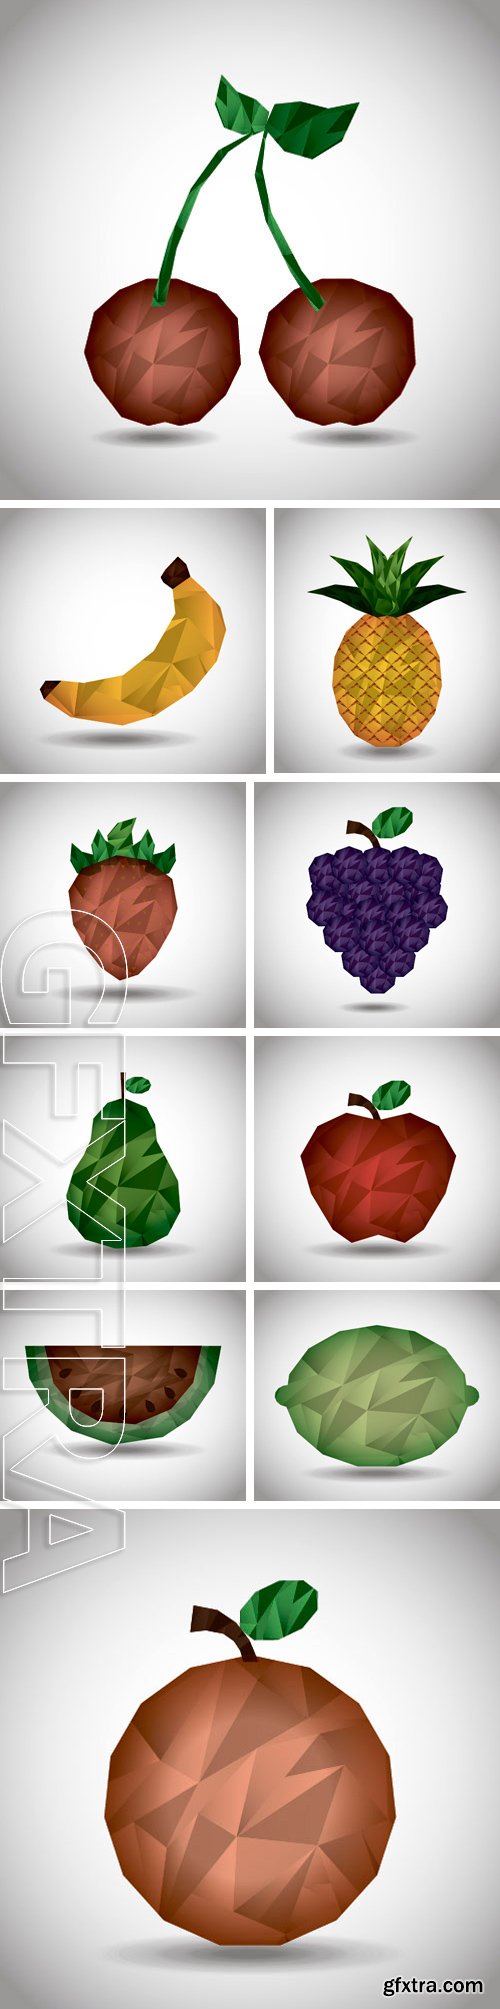 Stock Vectors - Abstract fruit design, vector illustration graphic